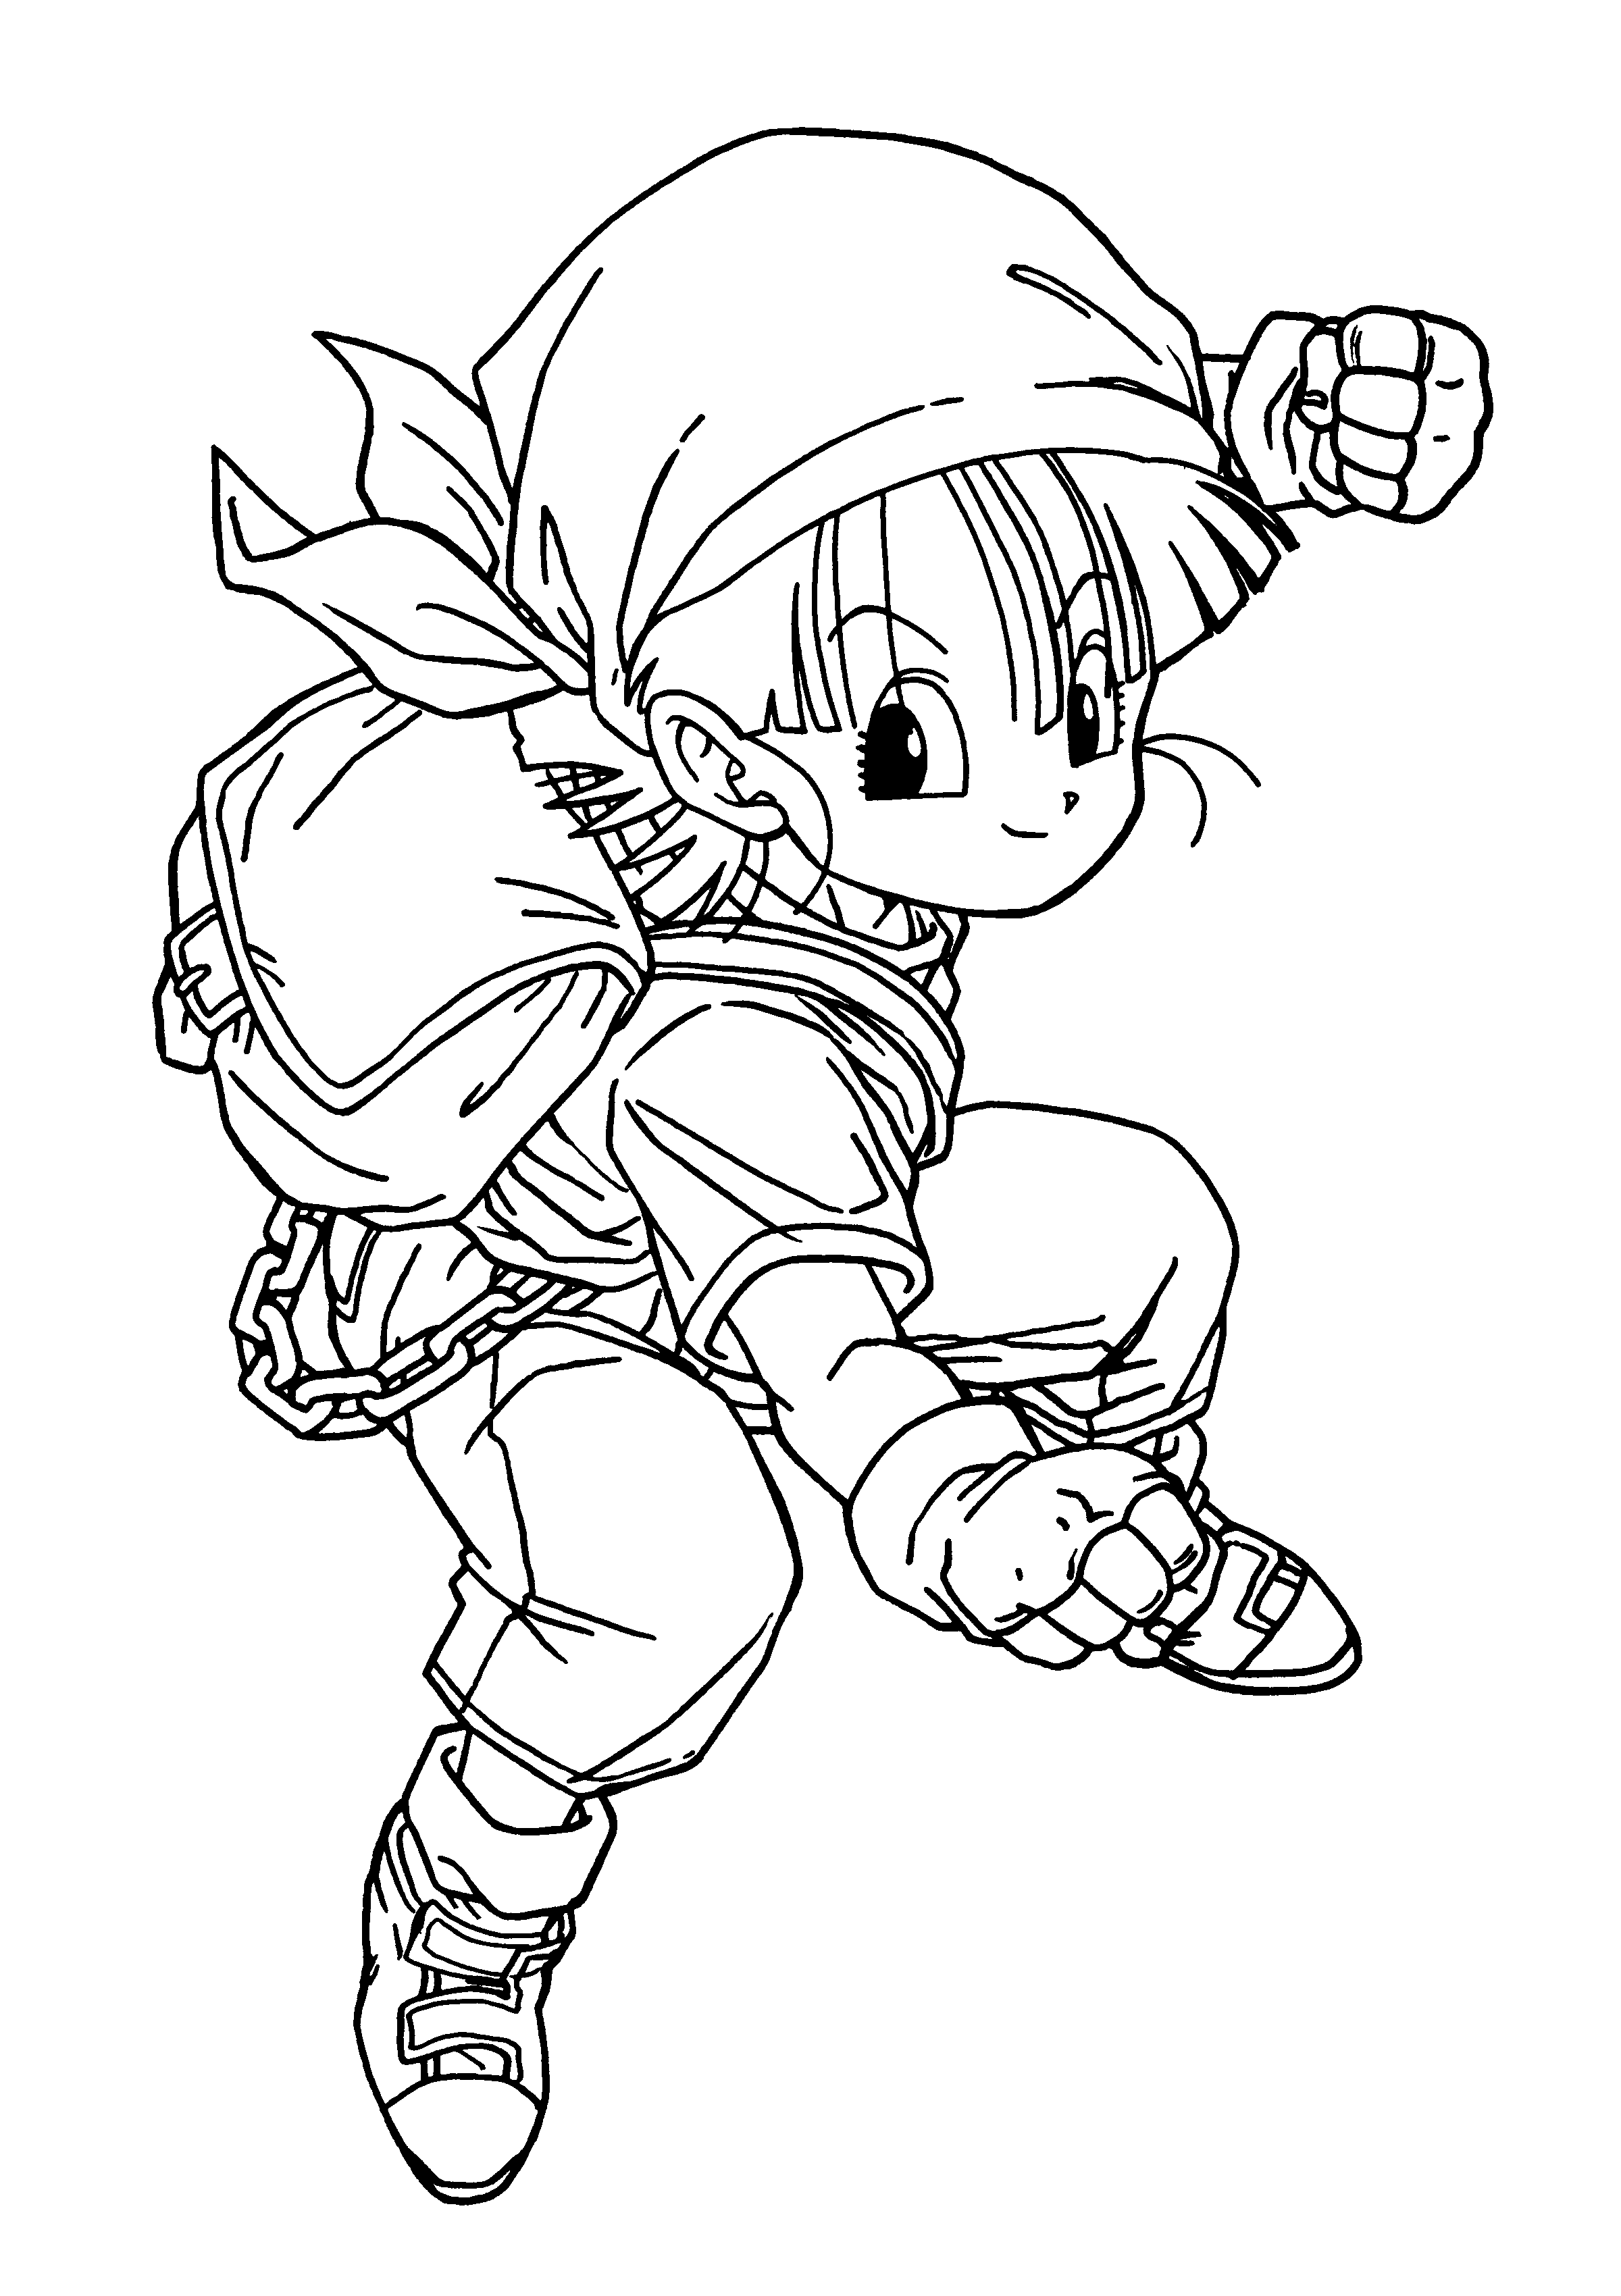 Dragon Ball Z Coloring Pages Boo - Coloring Home